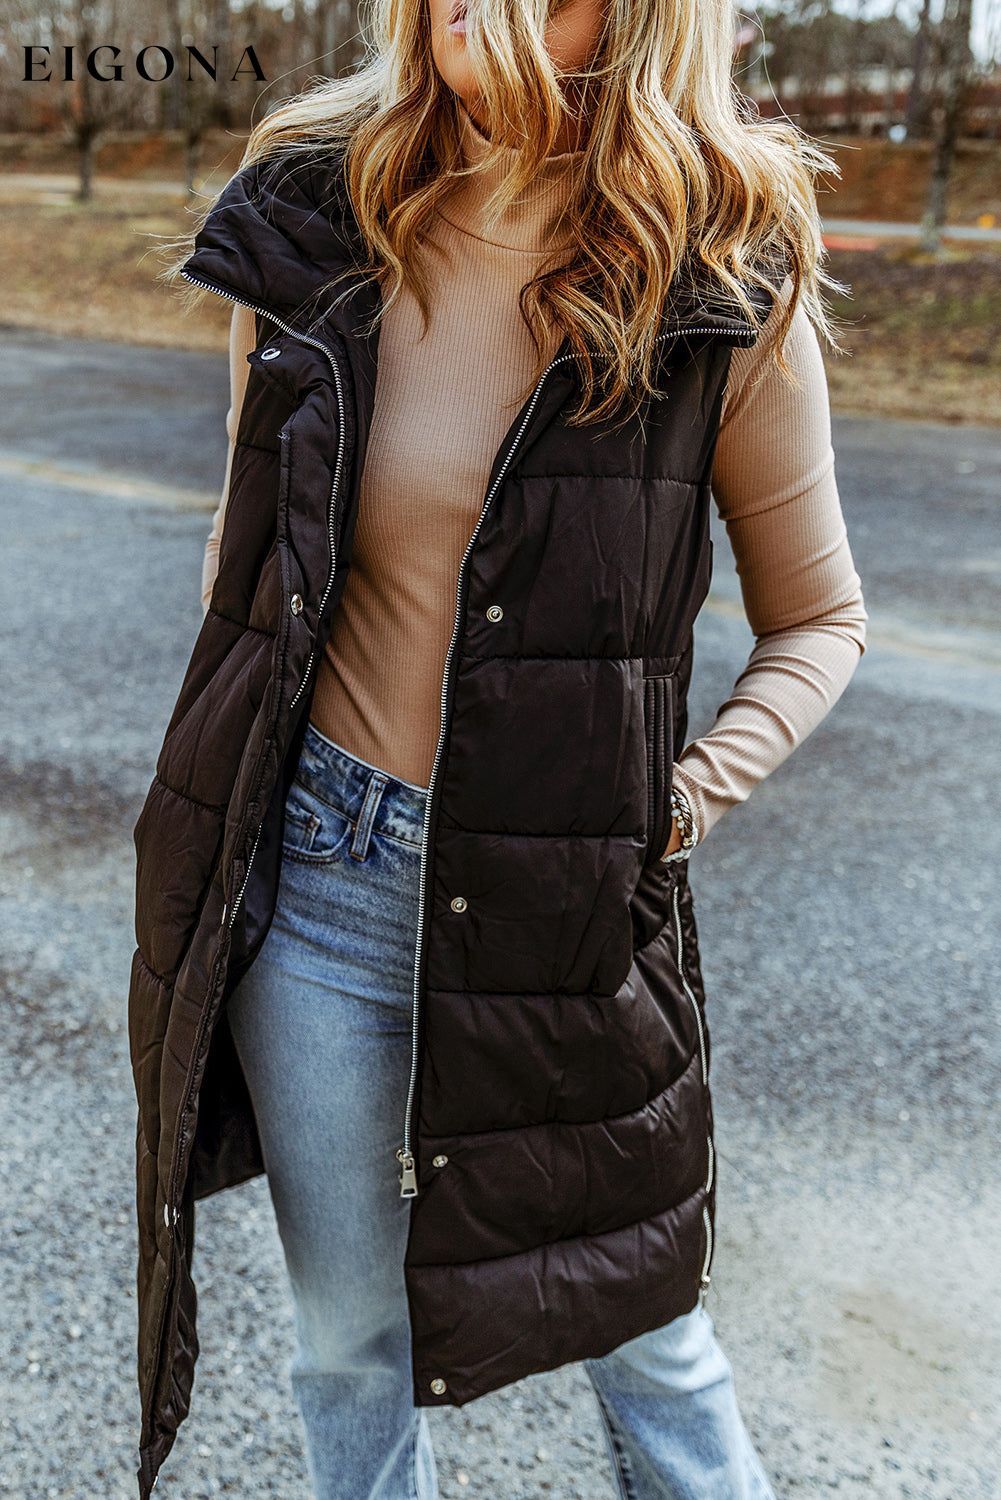 Black Hooded Long Quilted Vest Coat All In Stock Best Sellers clothes Craft Quilted DL Chic DL Exclusive EDM Monthly Recomend EDM Warm Jacket Jackets & Coats long vest Occasion Daily Print Solid Color puffy vest Season Winter Style Casual